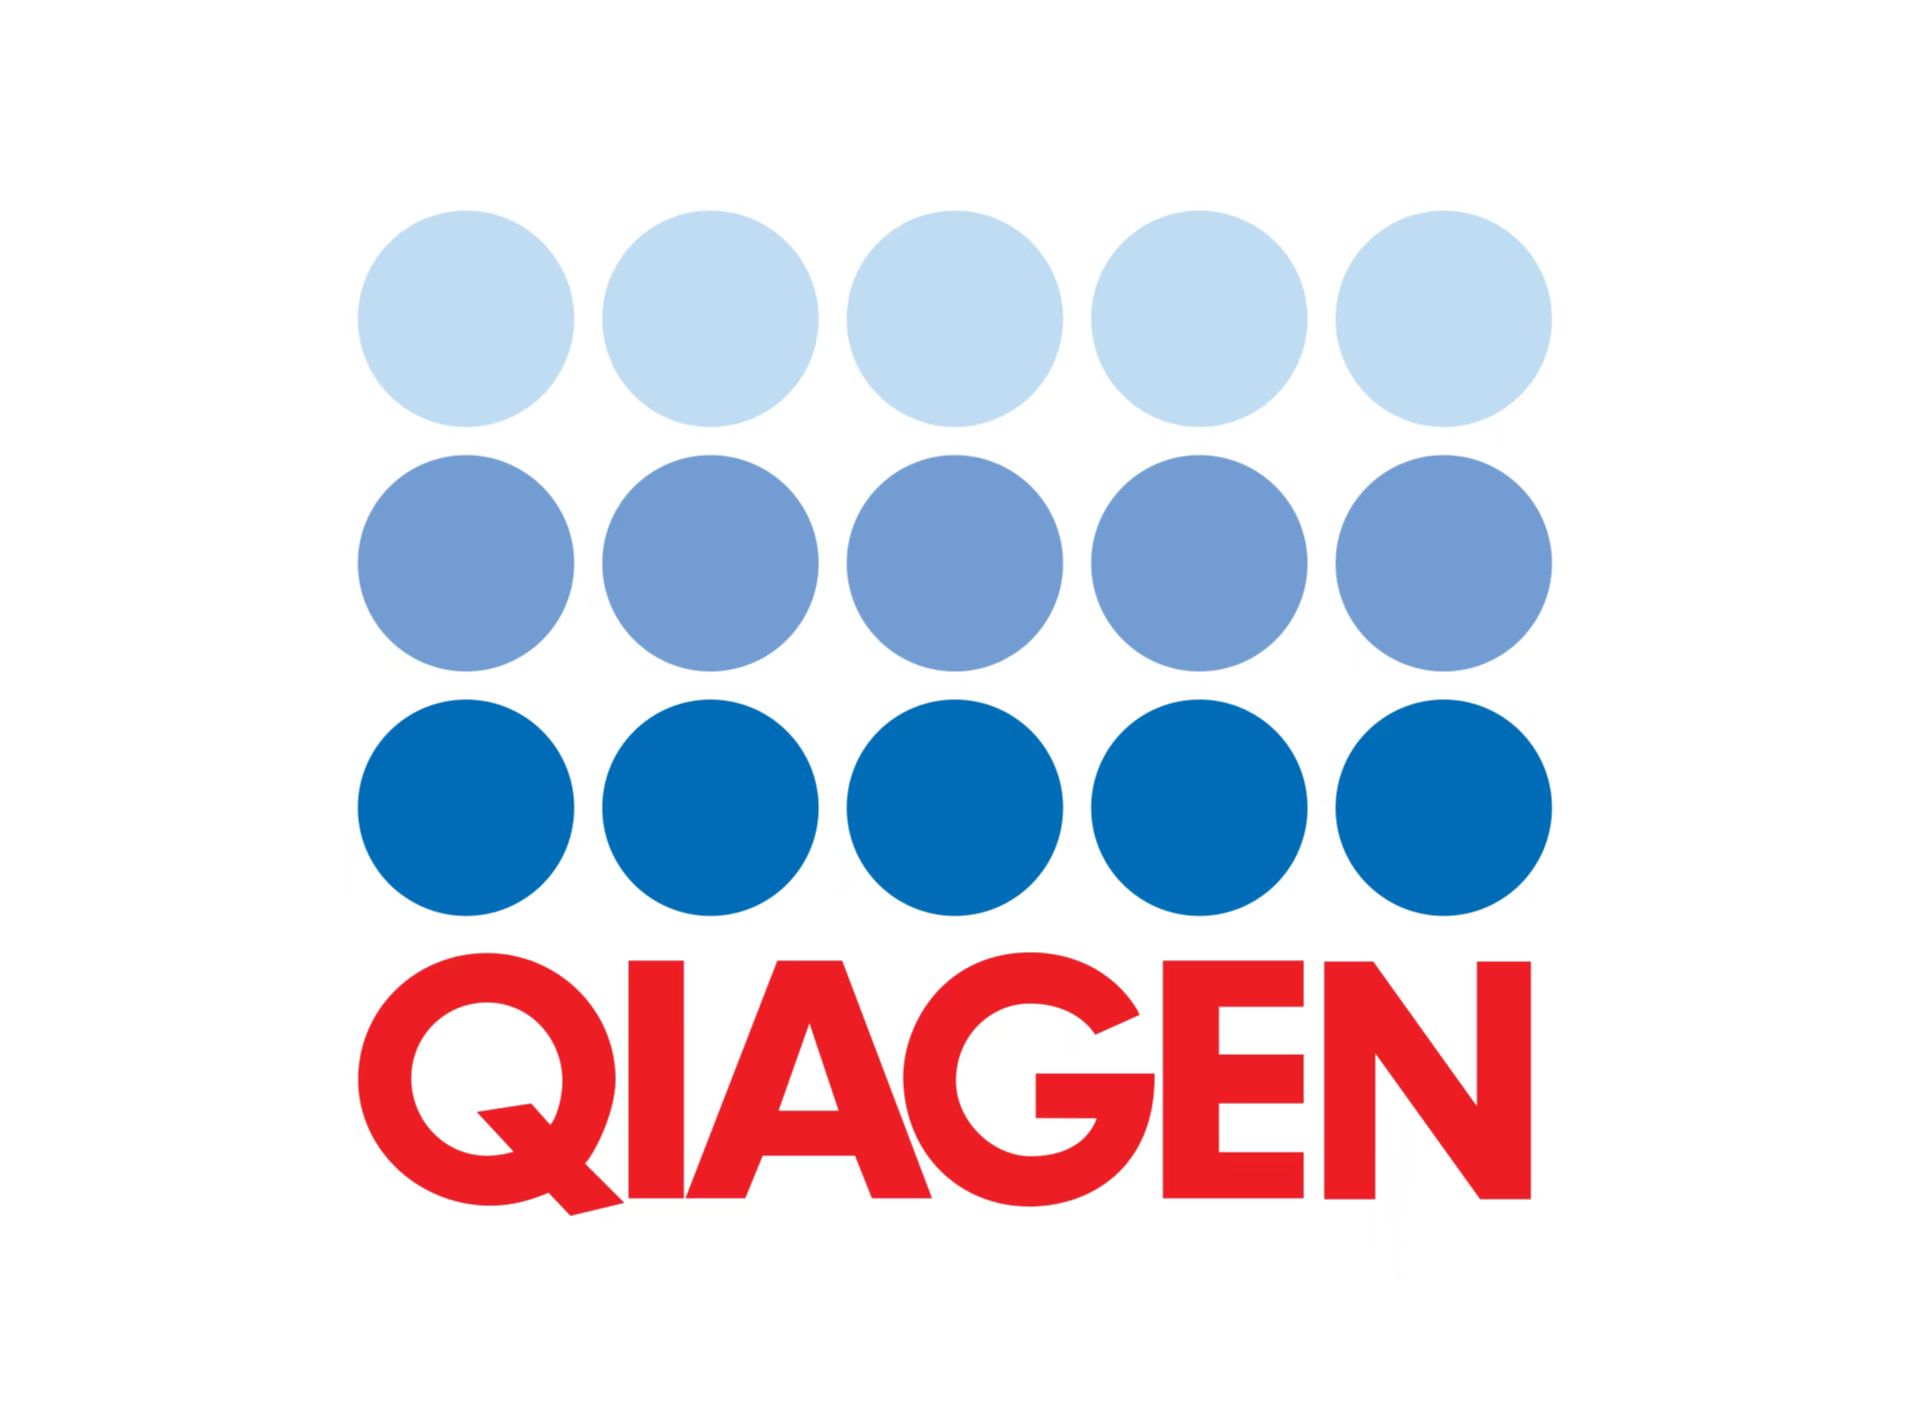 QIAGEN introduces QIAstat-Dx Analyzer 2.0 with remote test results access, enhancing collaboration across healthcare system